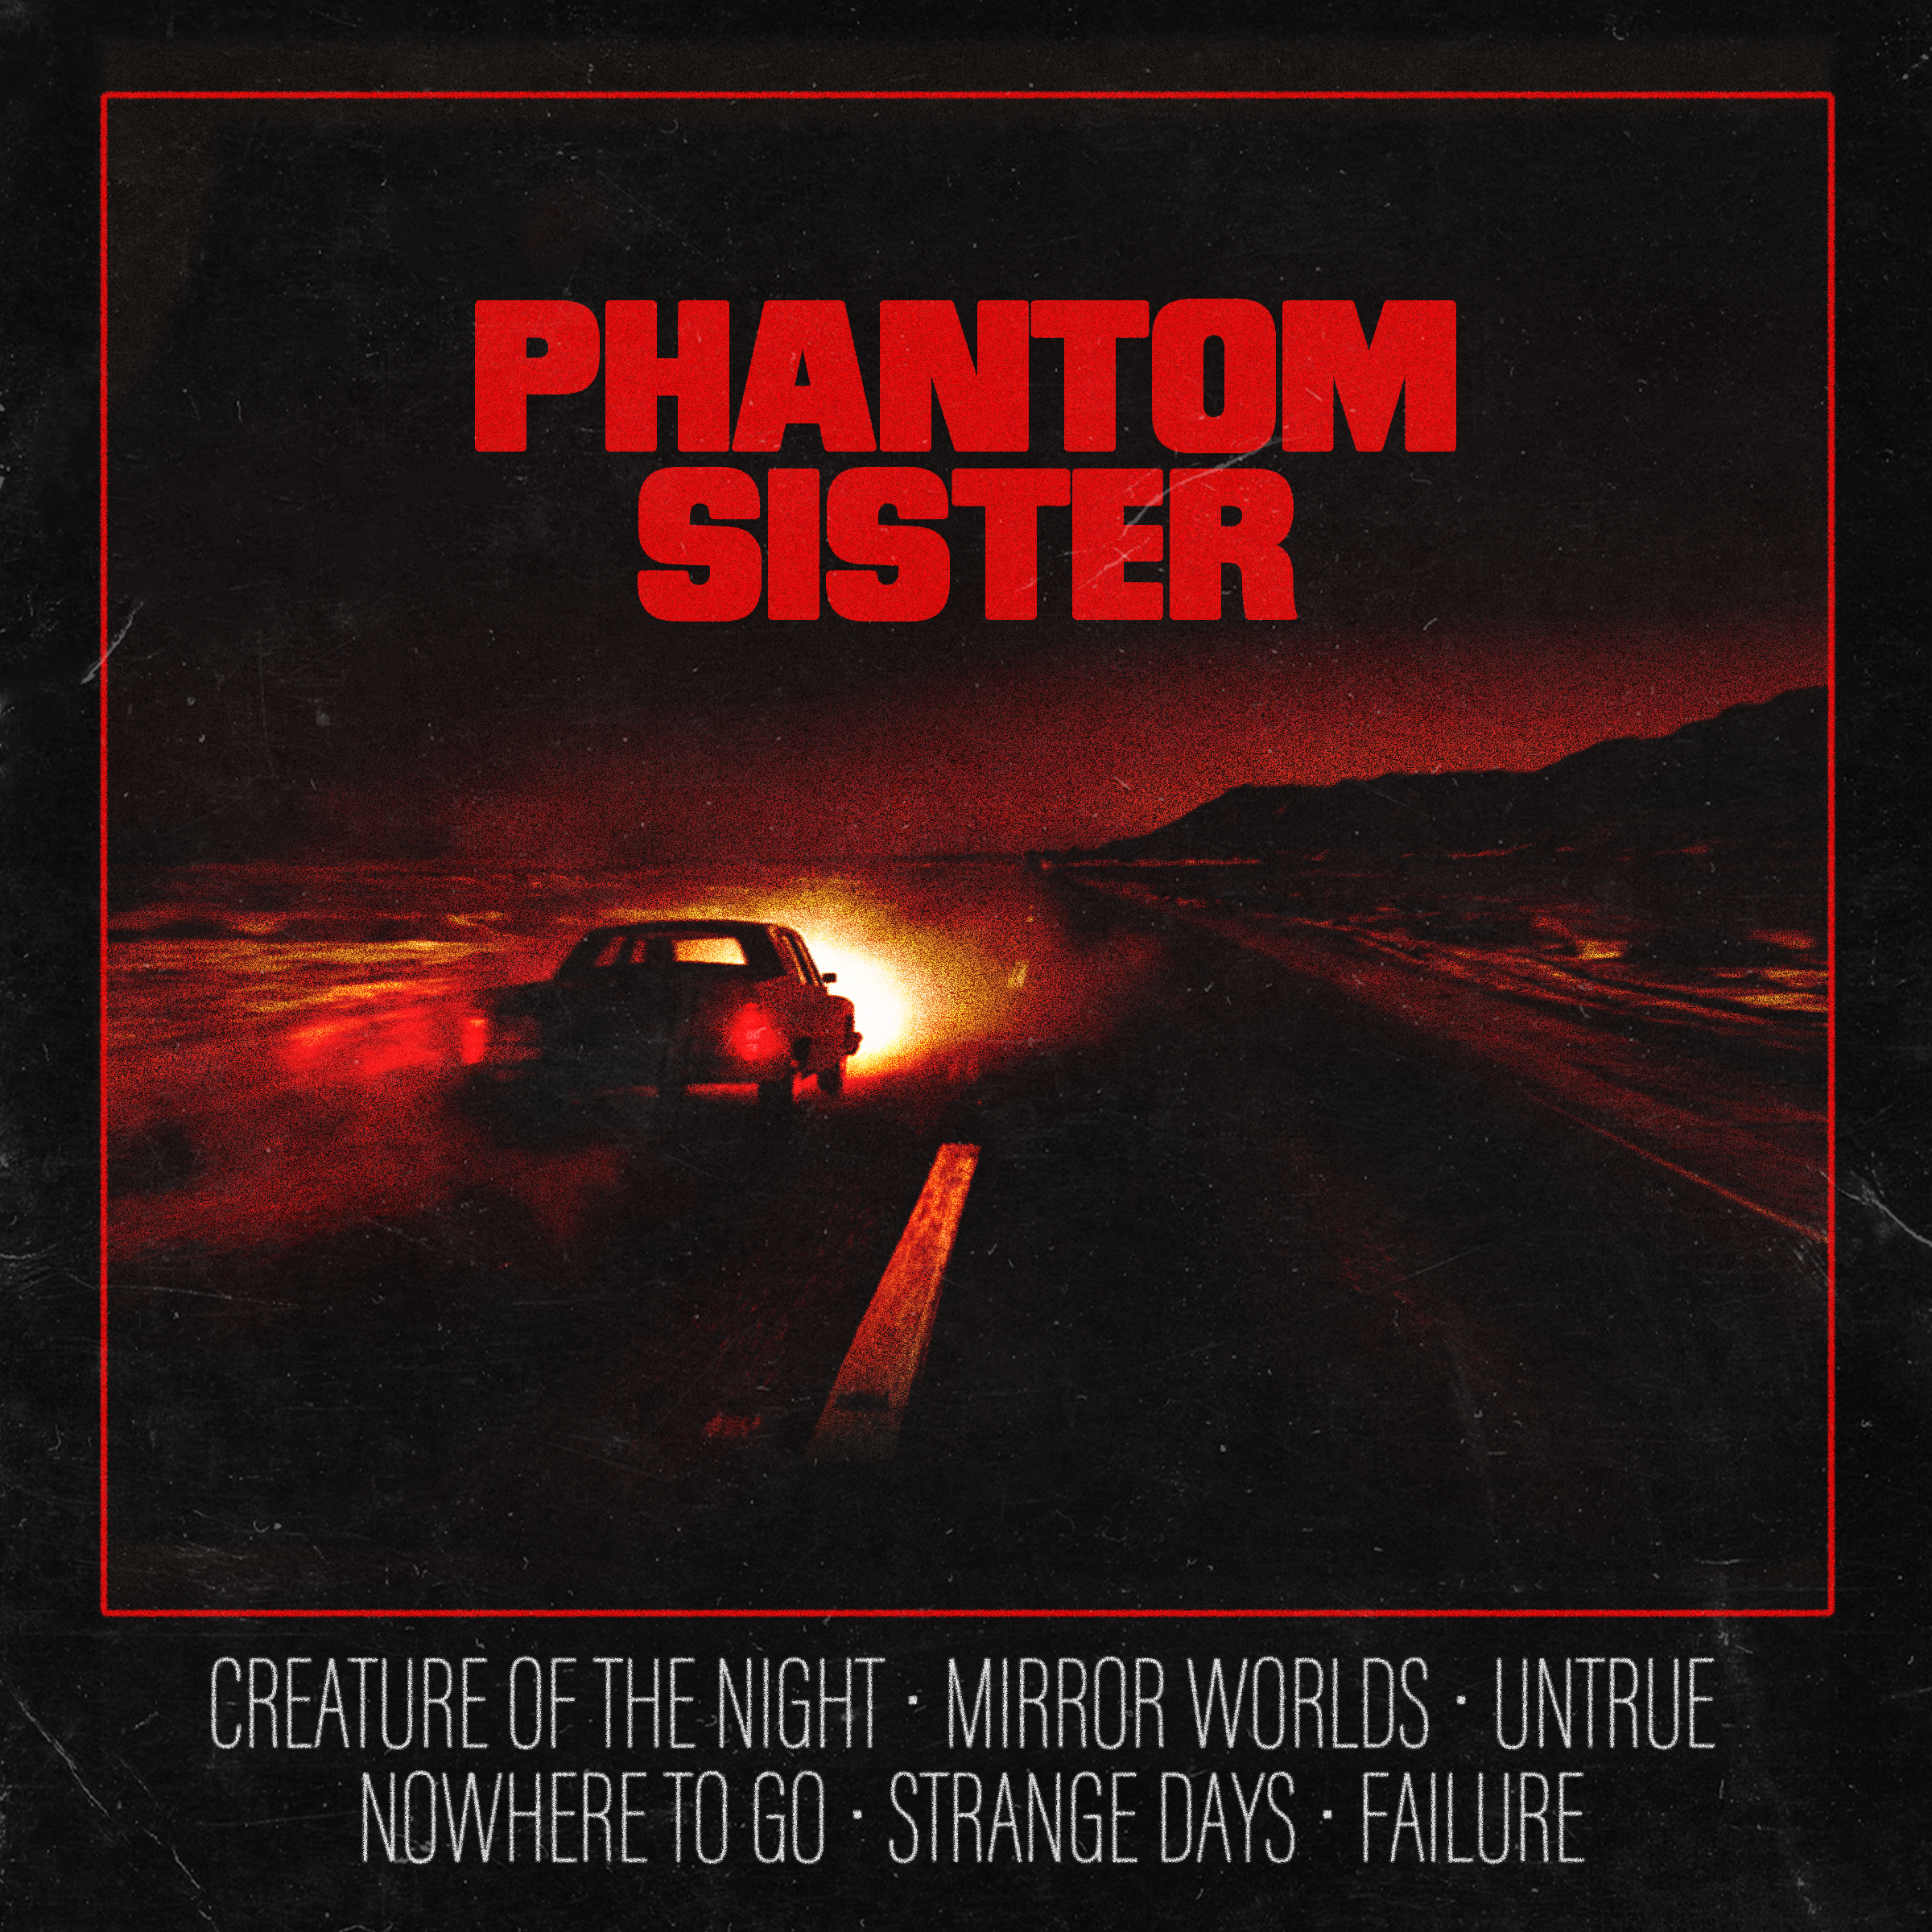 Listen to the Twangy Punk, Deathrock, and Gothic Rock of Los Angeles Quartet Phantom Sister’s Mood-laden Self-Titled Debut EP